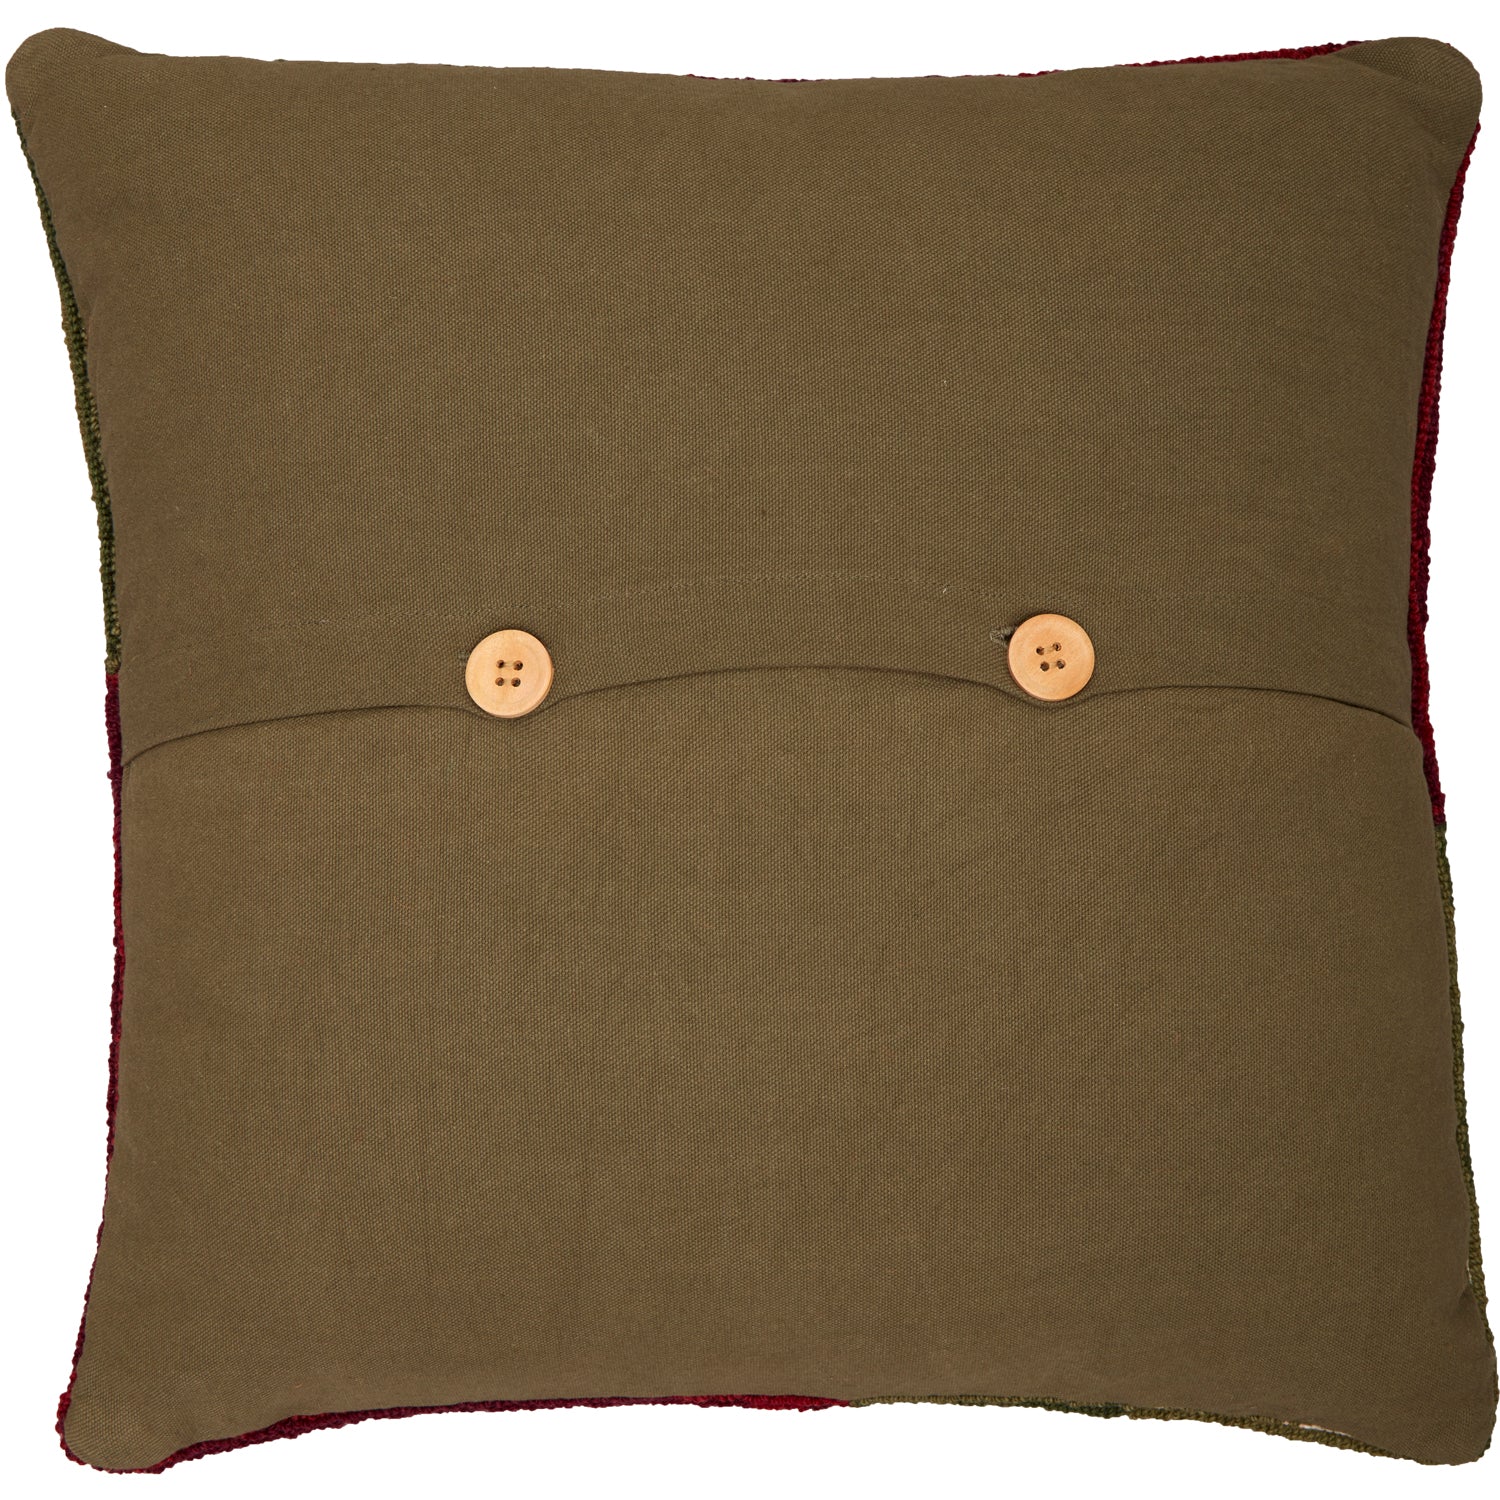 Tea Cabin Log Cabin Hooked Pillow 18x18 - Clearance - Final Qtys - Allysons  Place